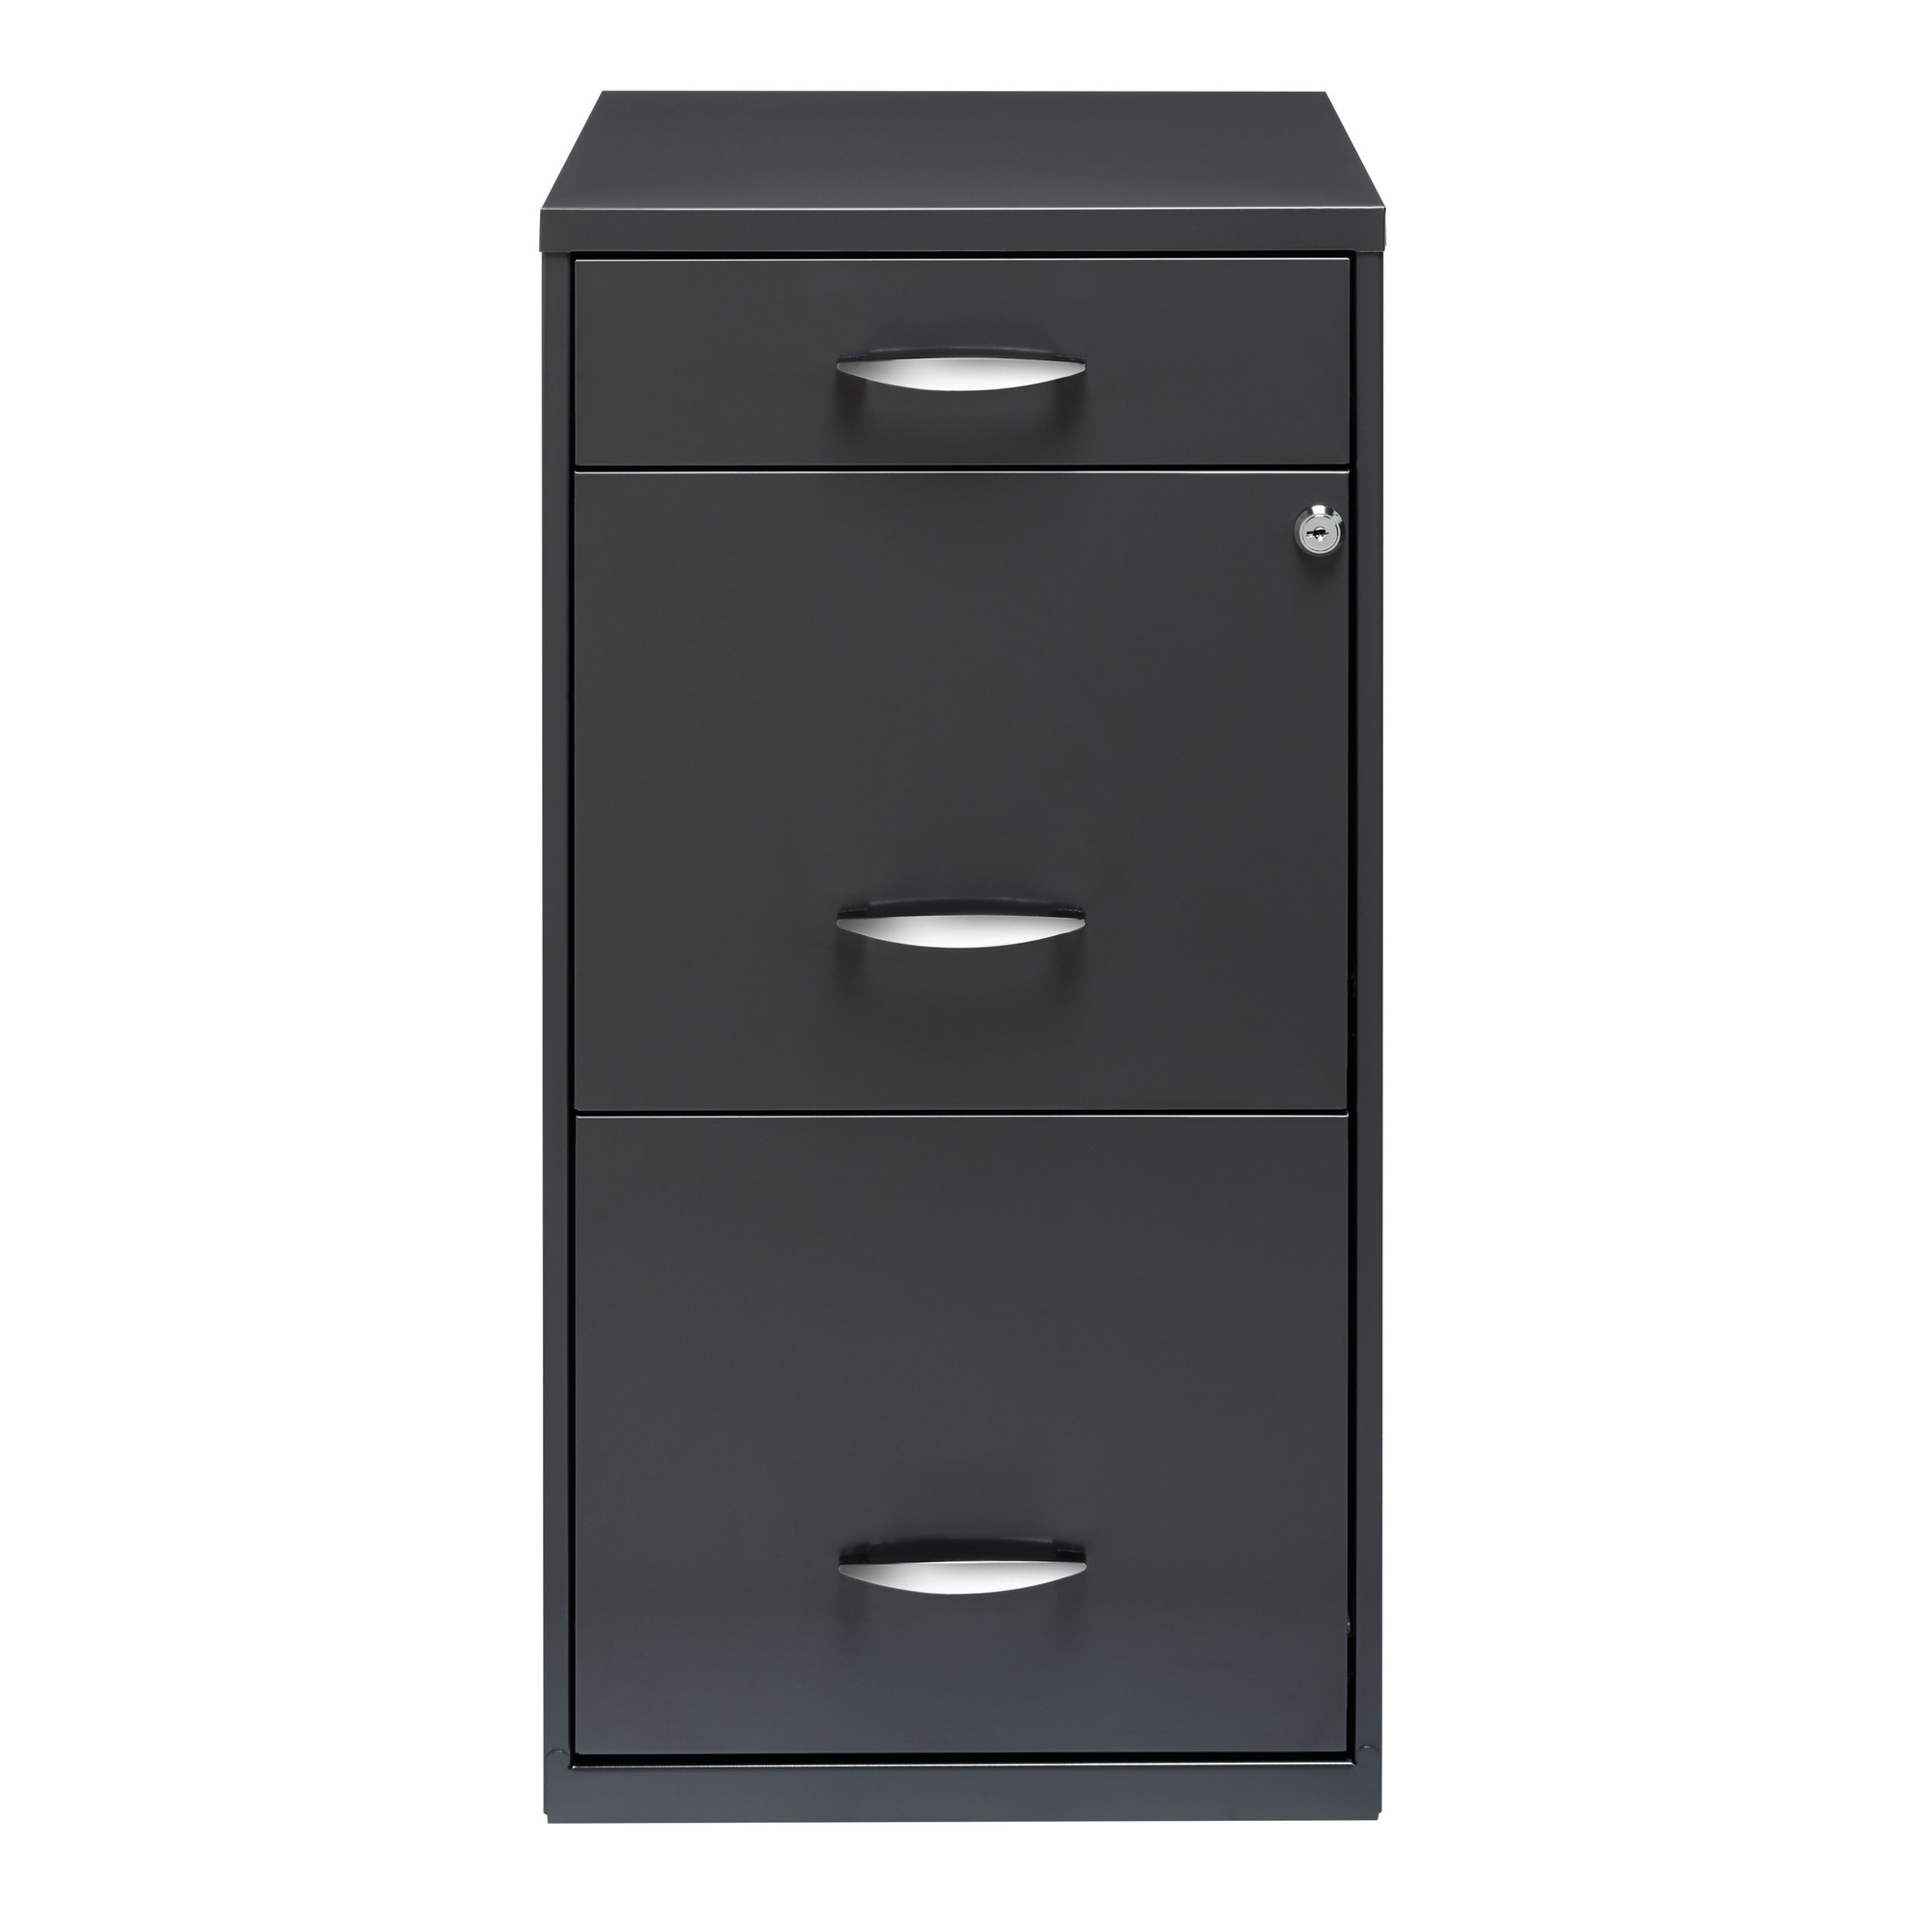 Hirsh Industries, 3 Drawer Letter Width File Cabinet, Pencil Drawer, Width 14.25 in, Depth 18 in, Height 27.32 in, Model 20205